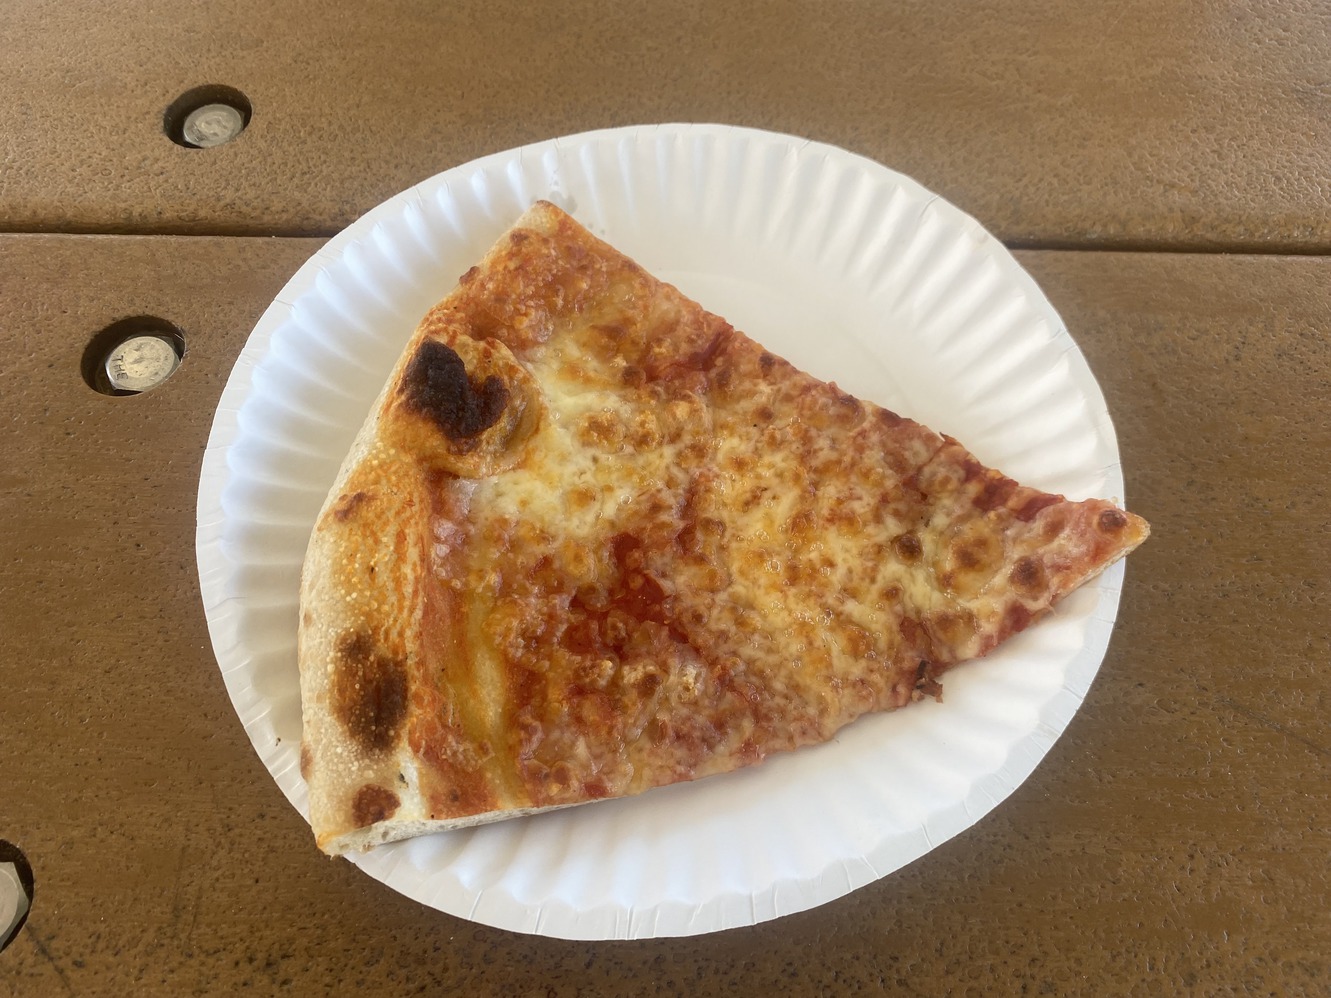 A slice of Cosmos cheese pizza.